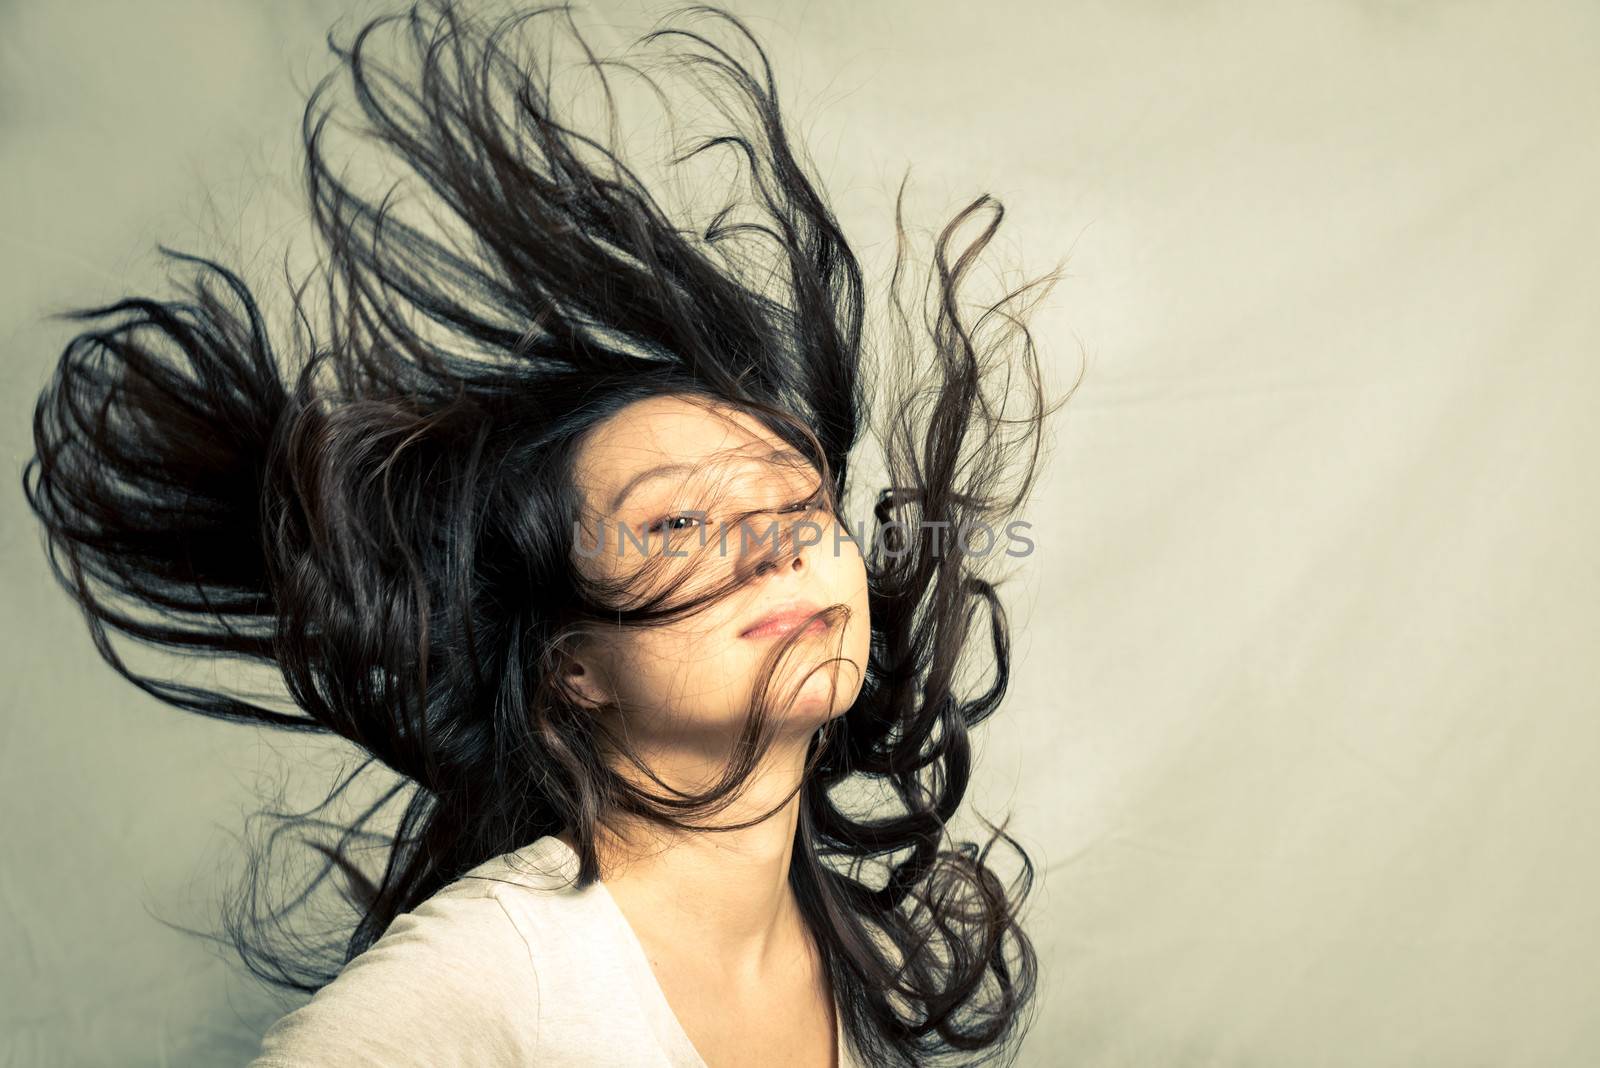 Young woman flicking her hair and posing, with fashion tone and background